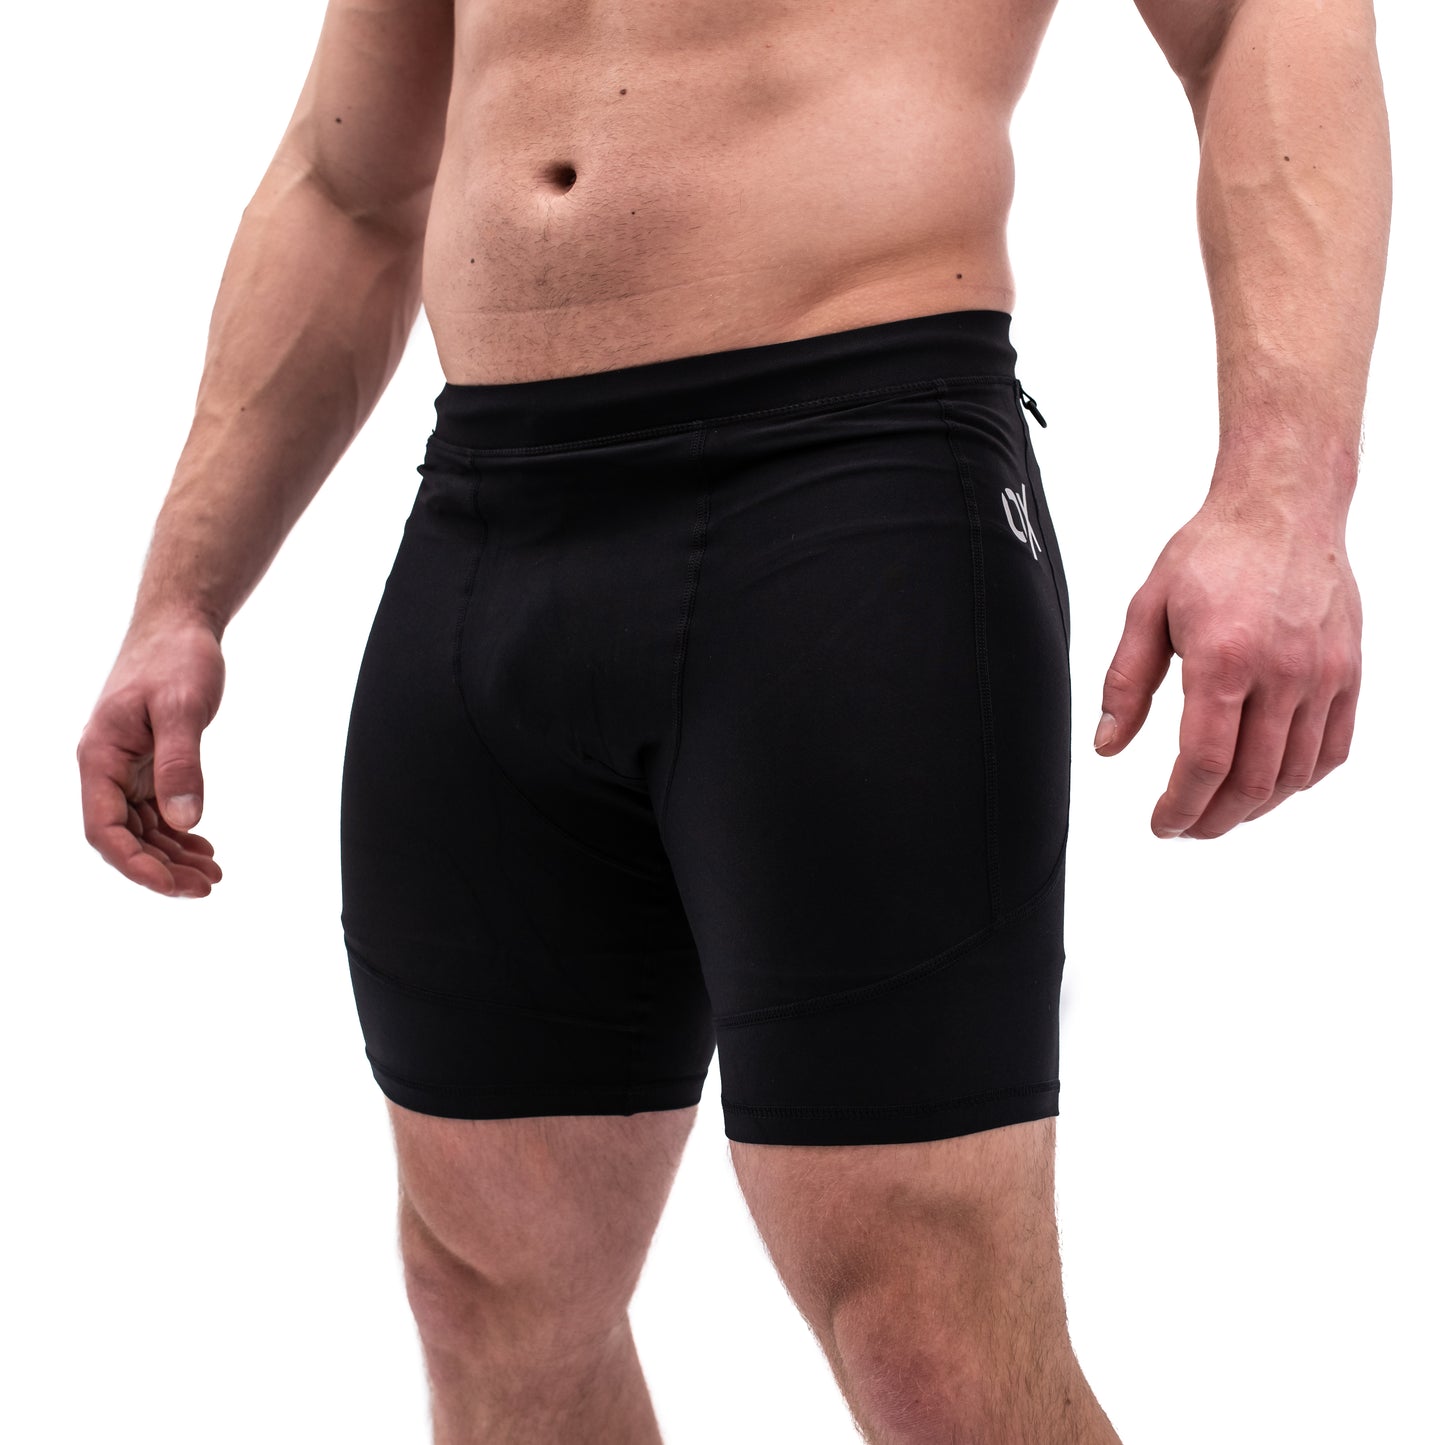 Ox Men's Compression Pants - Chromium  A7 Europe shipping to EU – A7 EUROPE